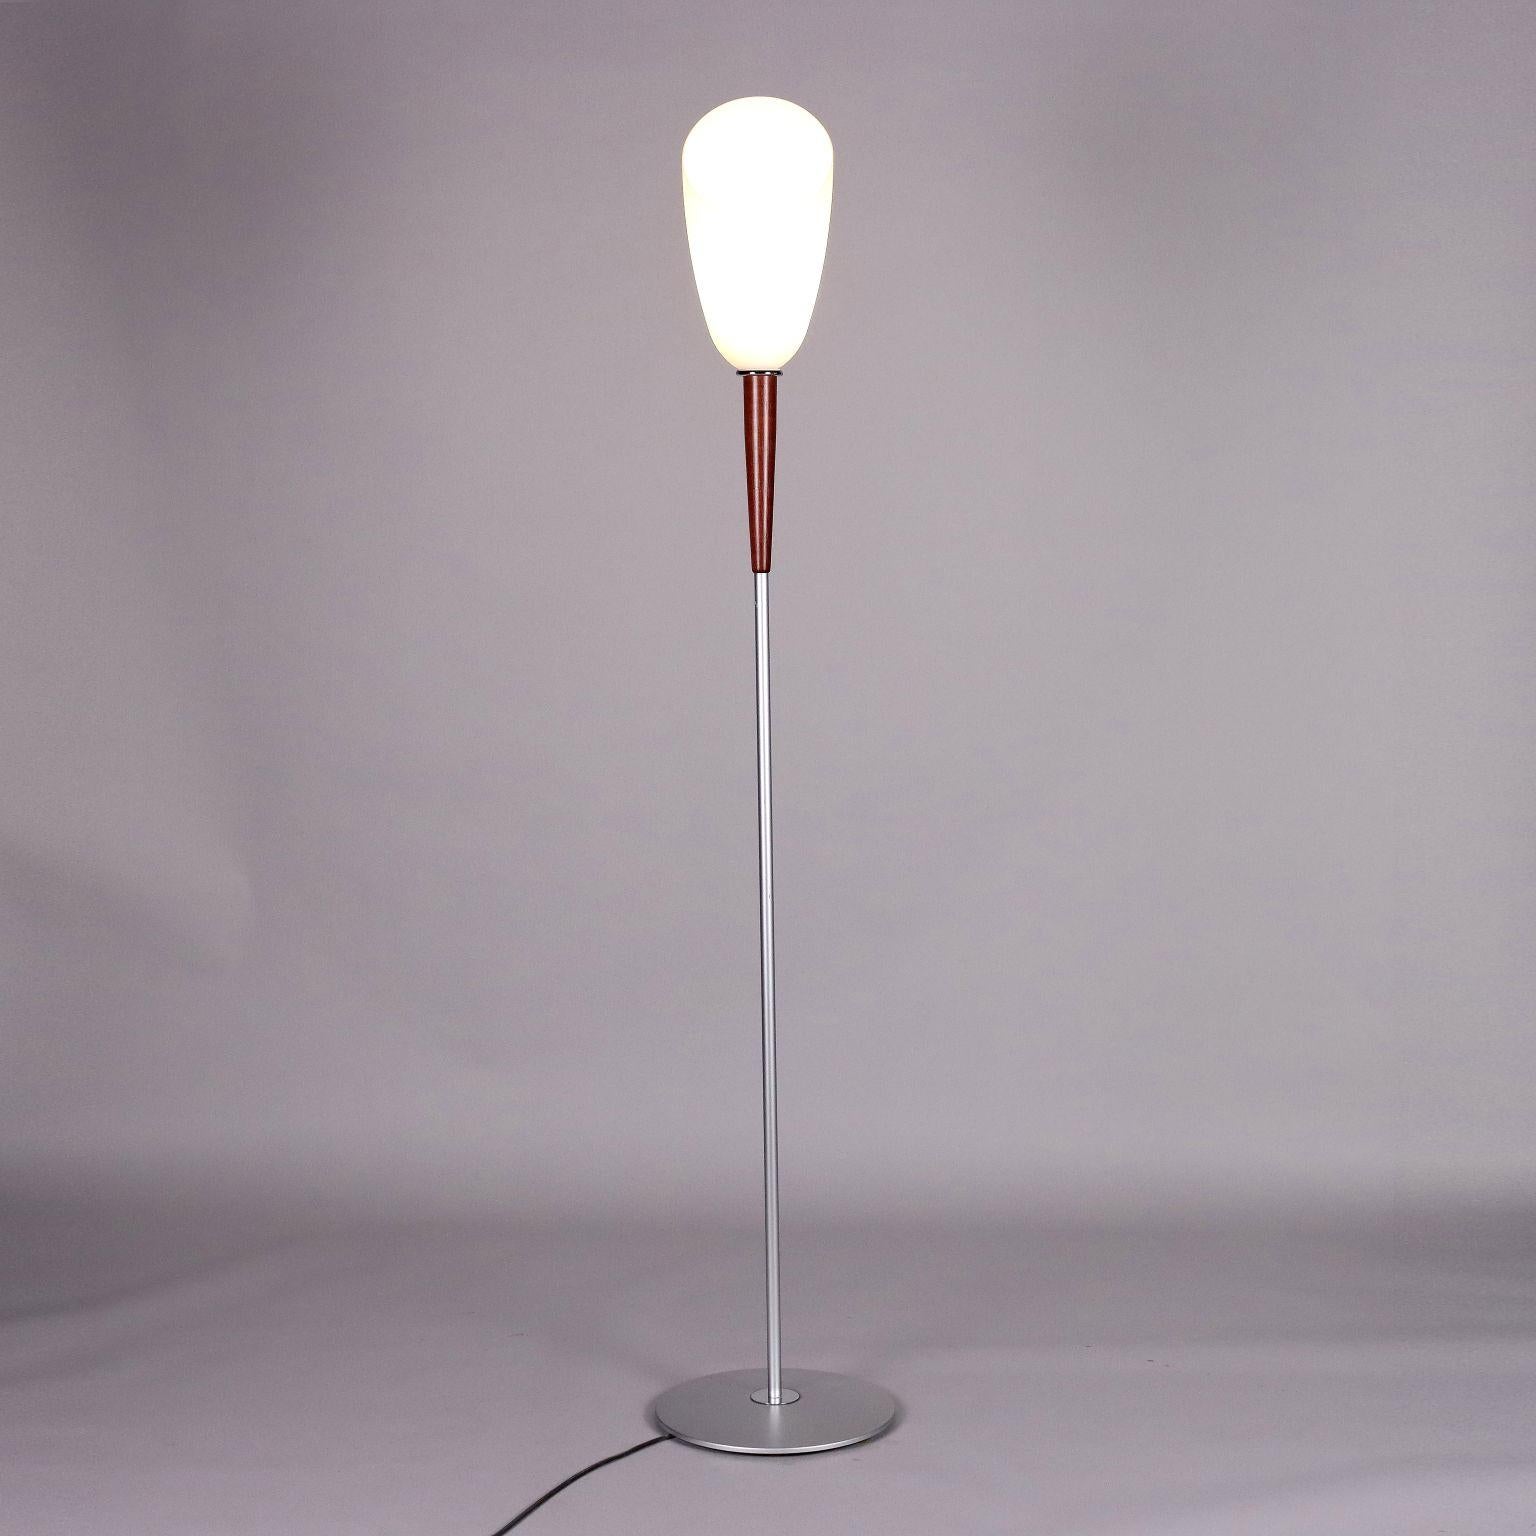 Floor lamp made of anodized aluminum, cherry wood and glass diffuser. 